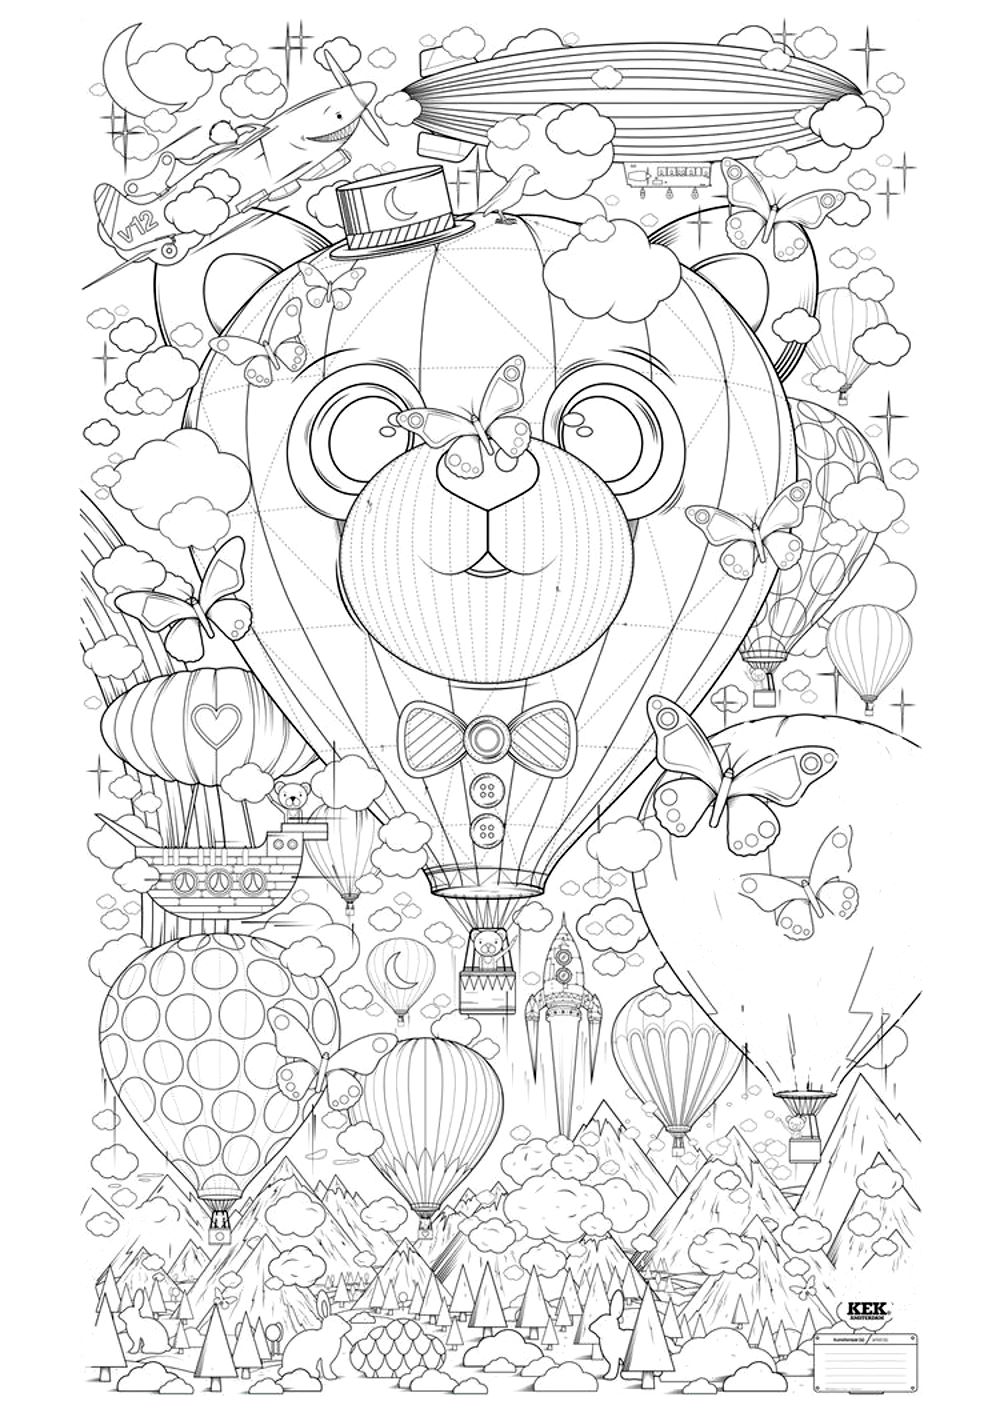 70 Hot Air Balloon Coloring Pages For Adults Download Free Images